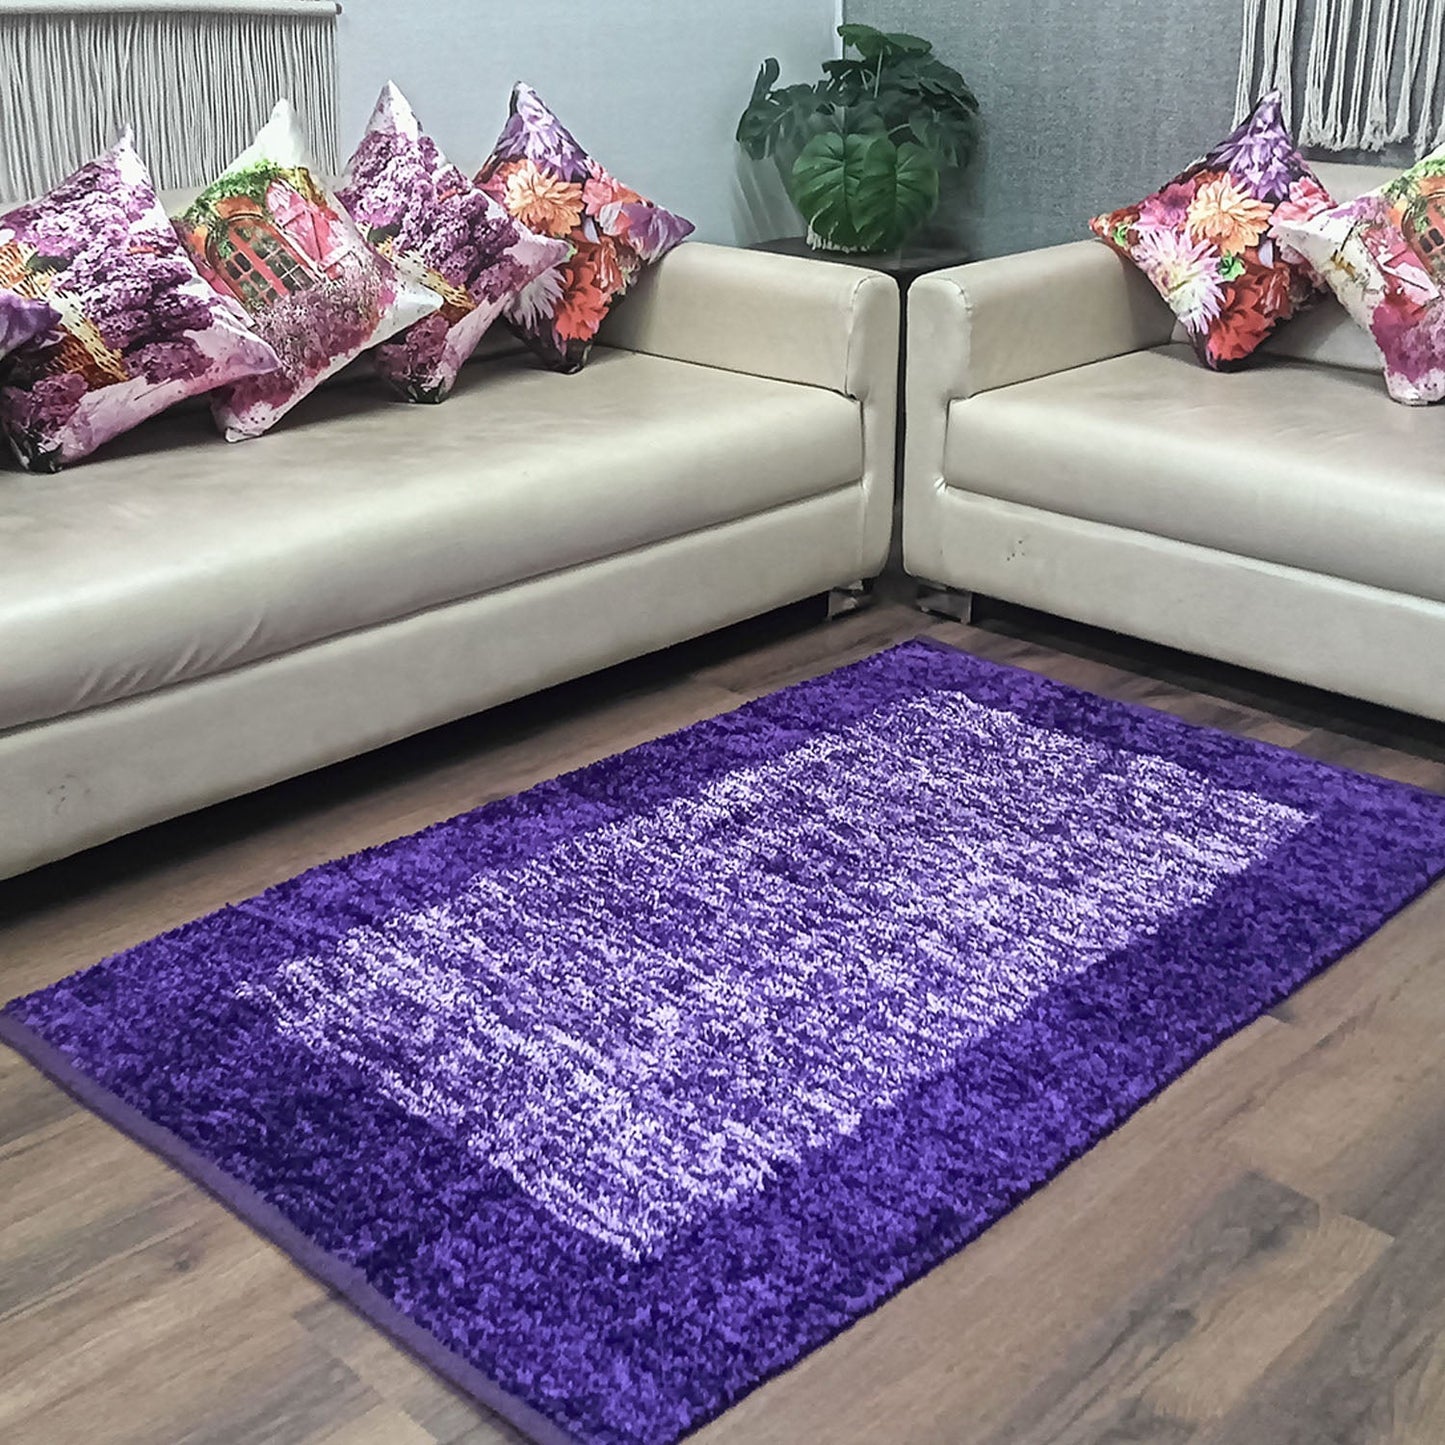 Avioni Handloom Cut Shuttle Rugs by Master Artisans | Soft Touch | Home Washable | Border Design in Purple and White  | Reversible - 3 feet x 5 feet (~90 cm x 150 cm)